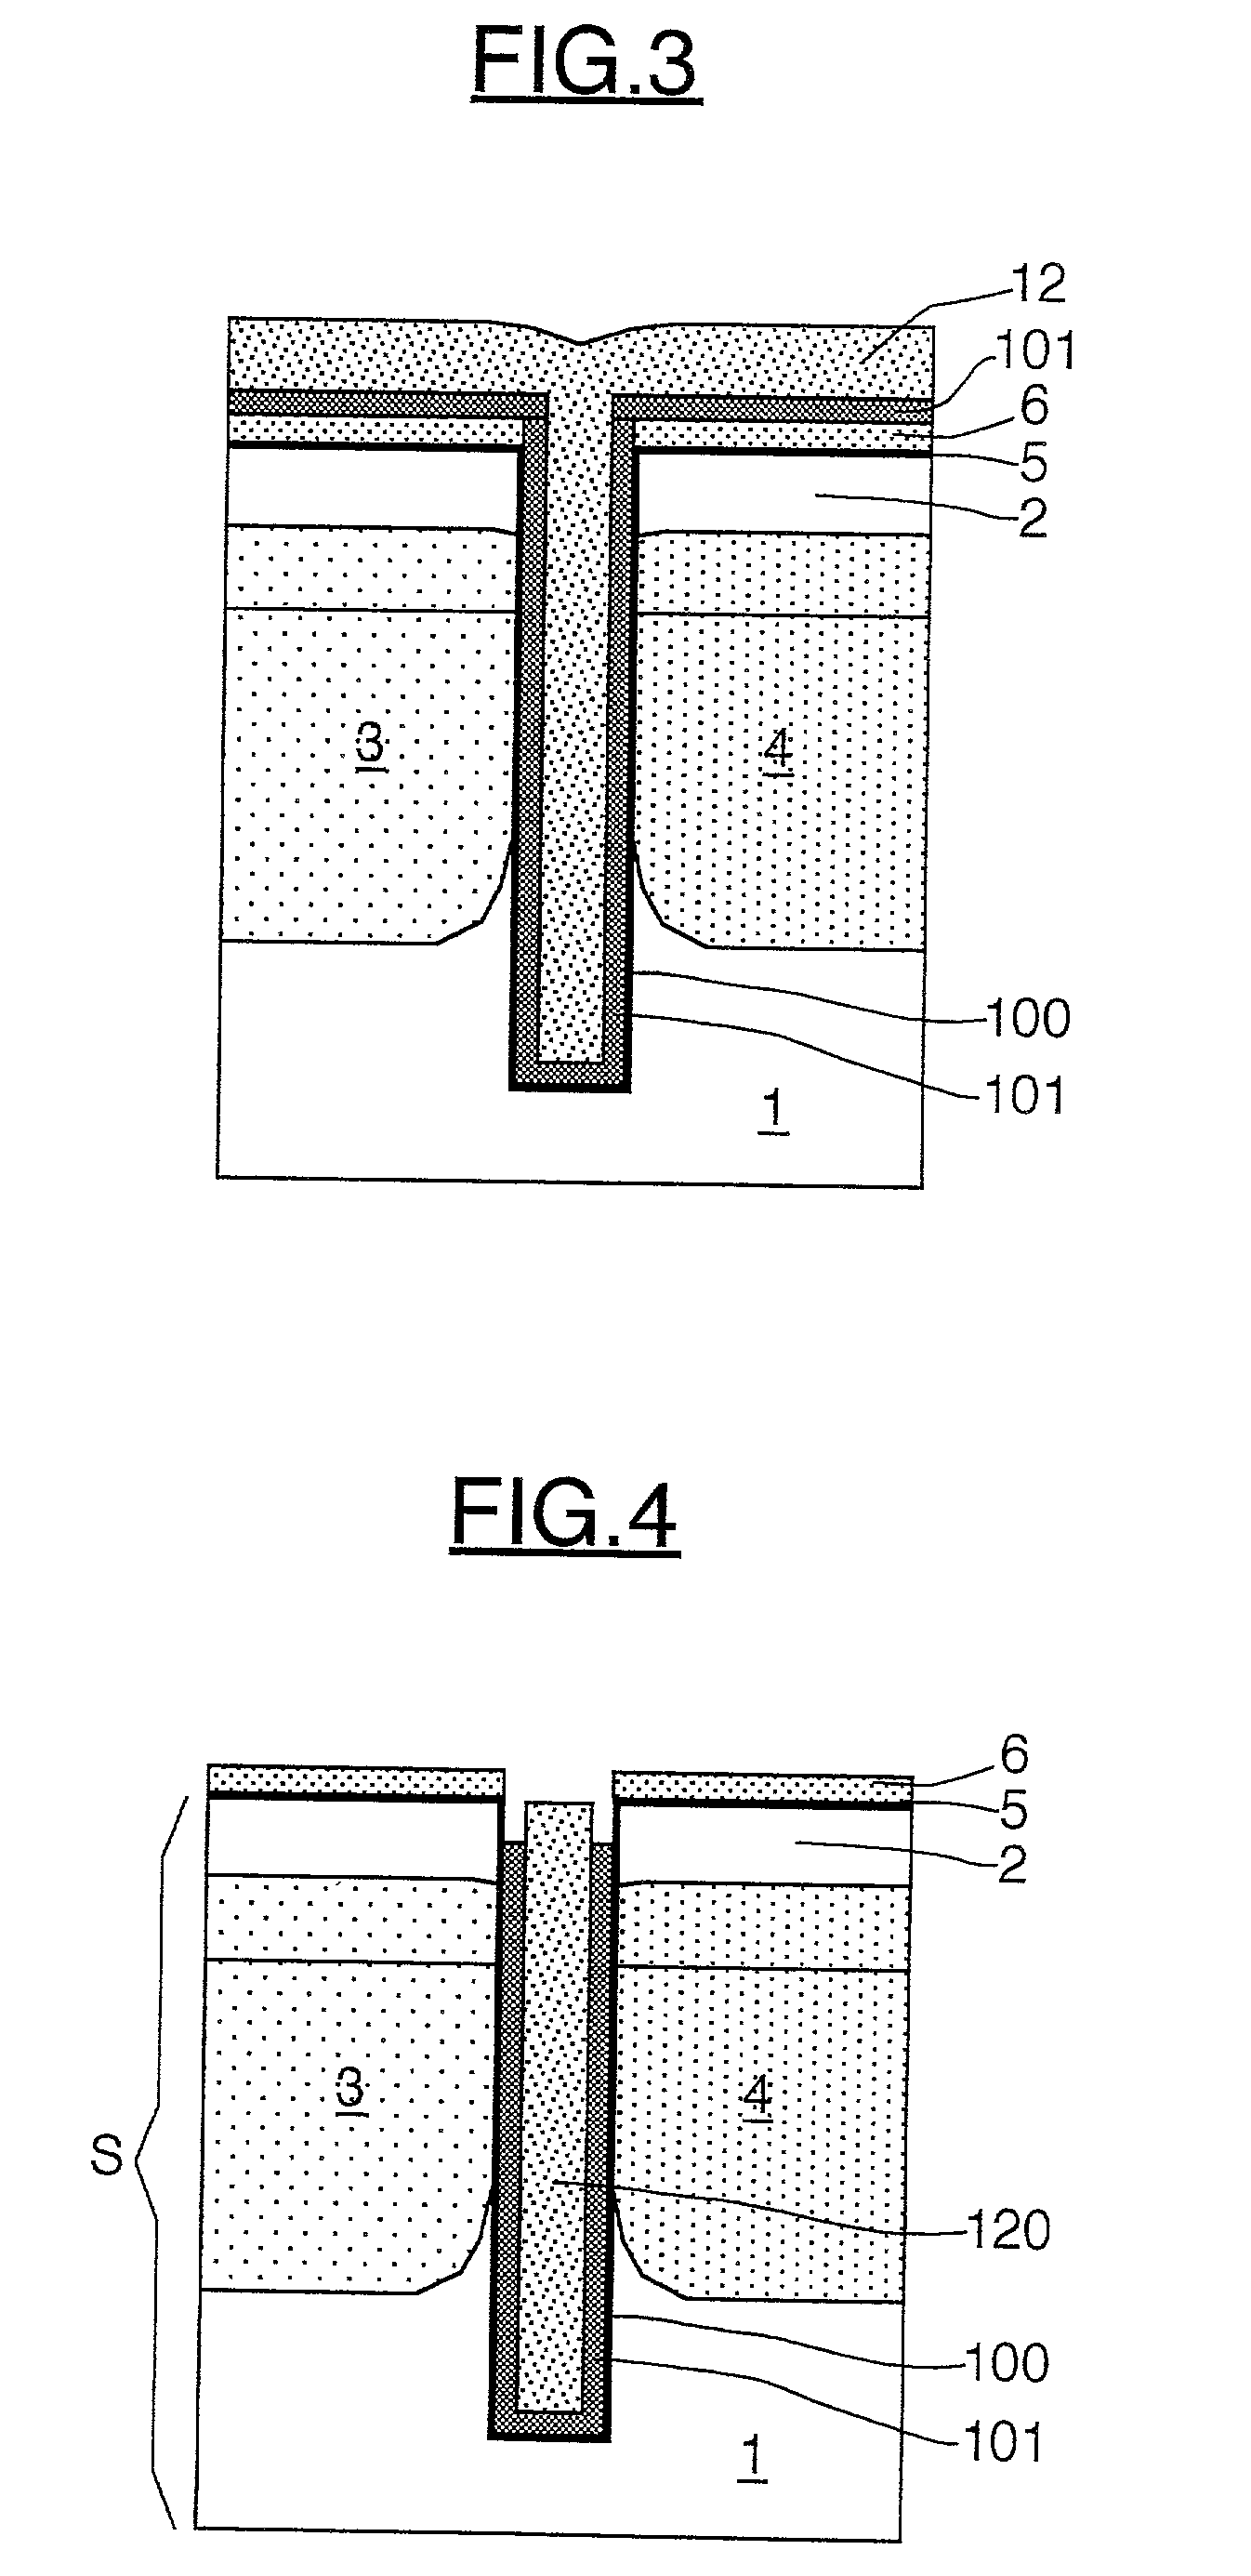 Process for forming deep and shallow insulative regions of an integrated circuit